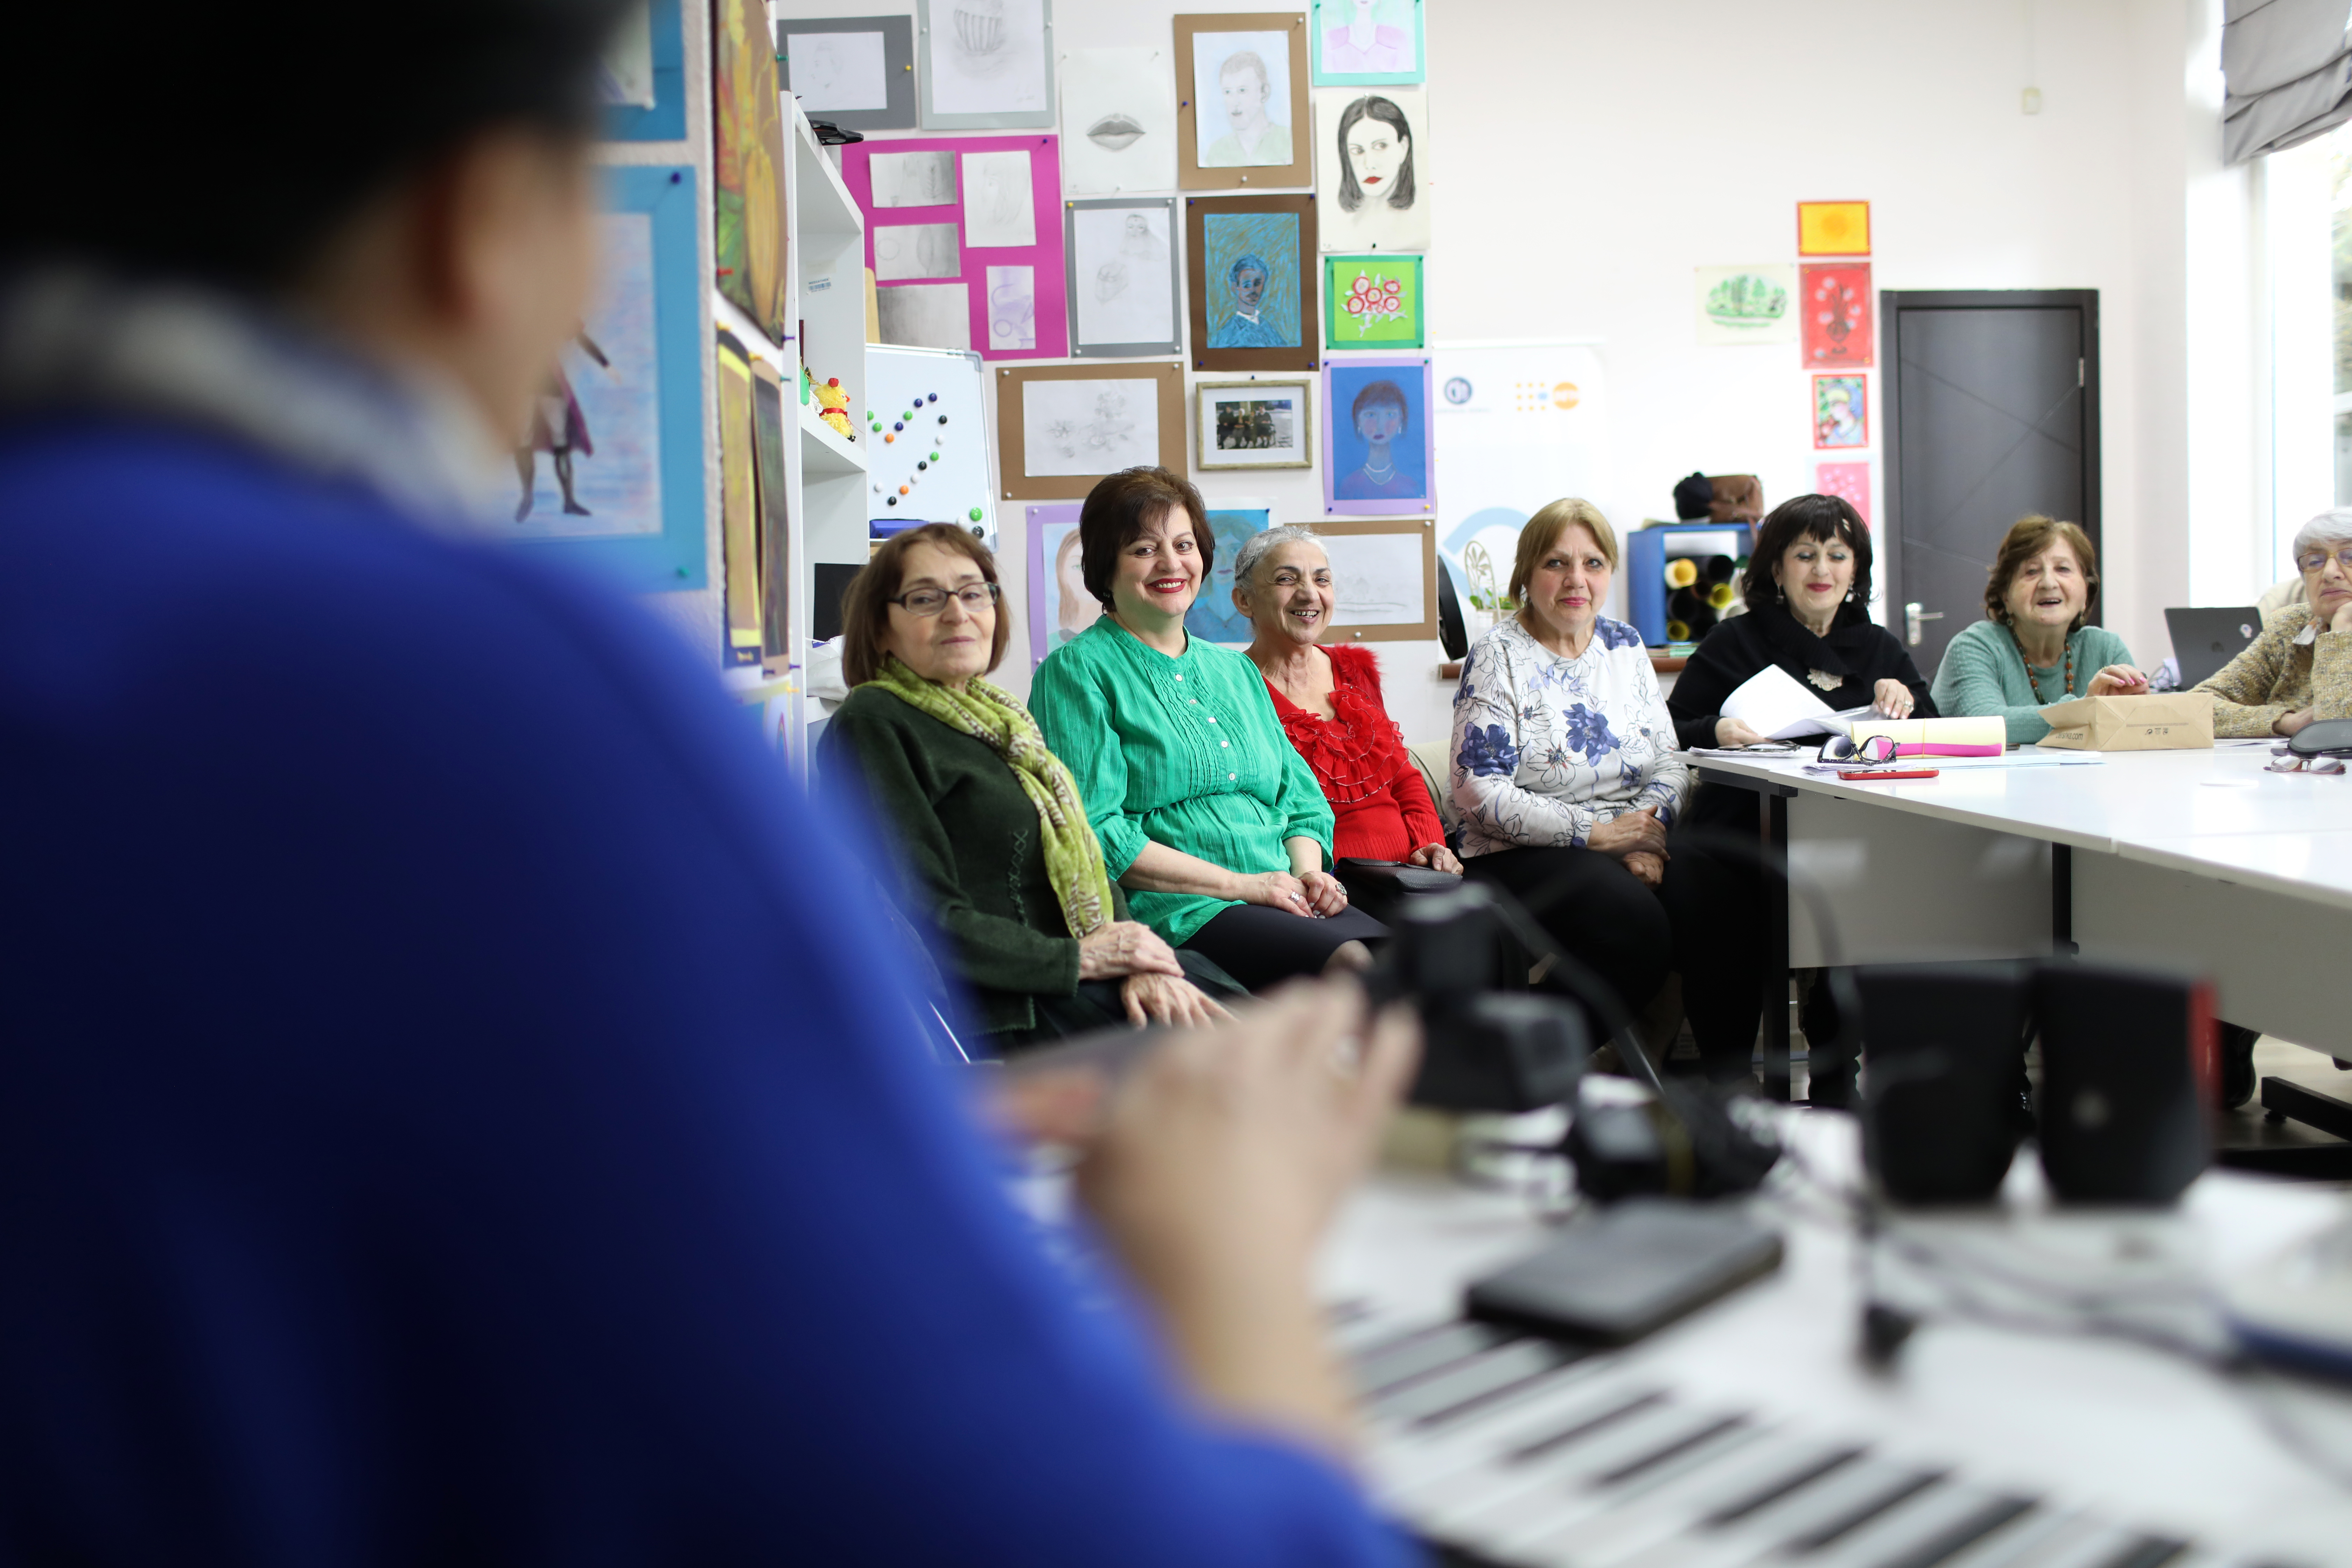 Members of 60+ Club in Tbilisi are having a music lesson